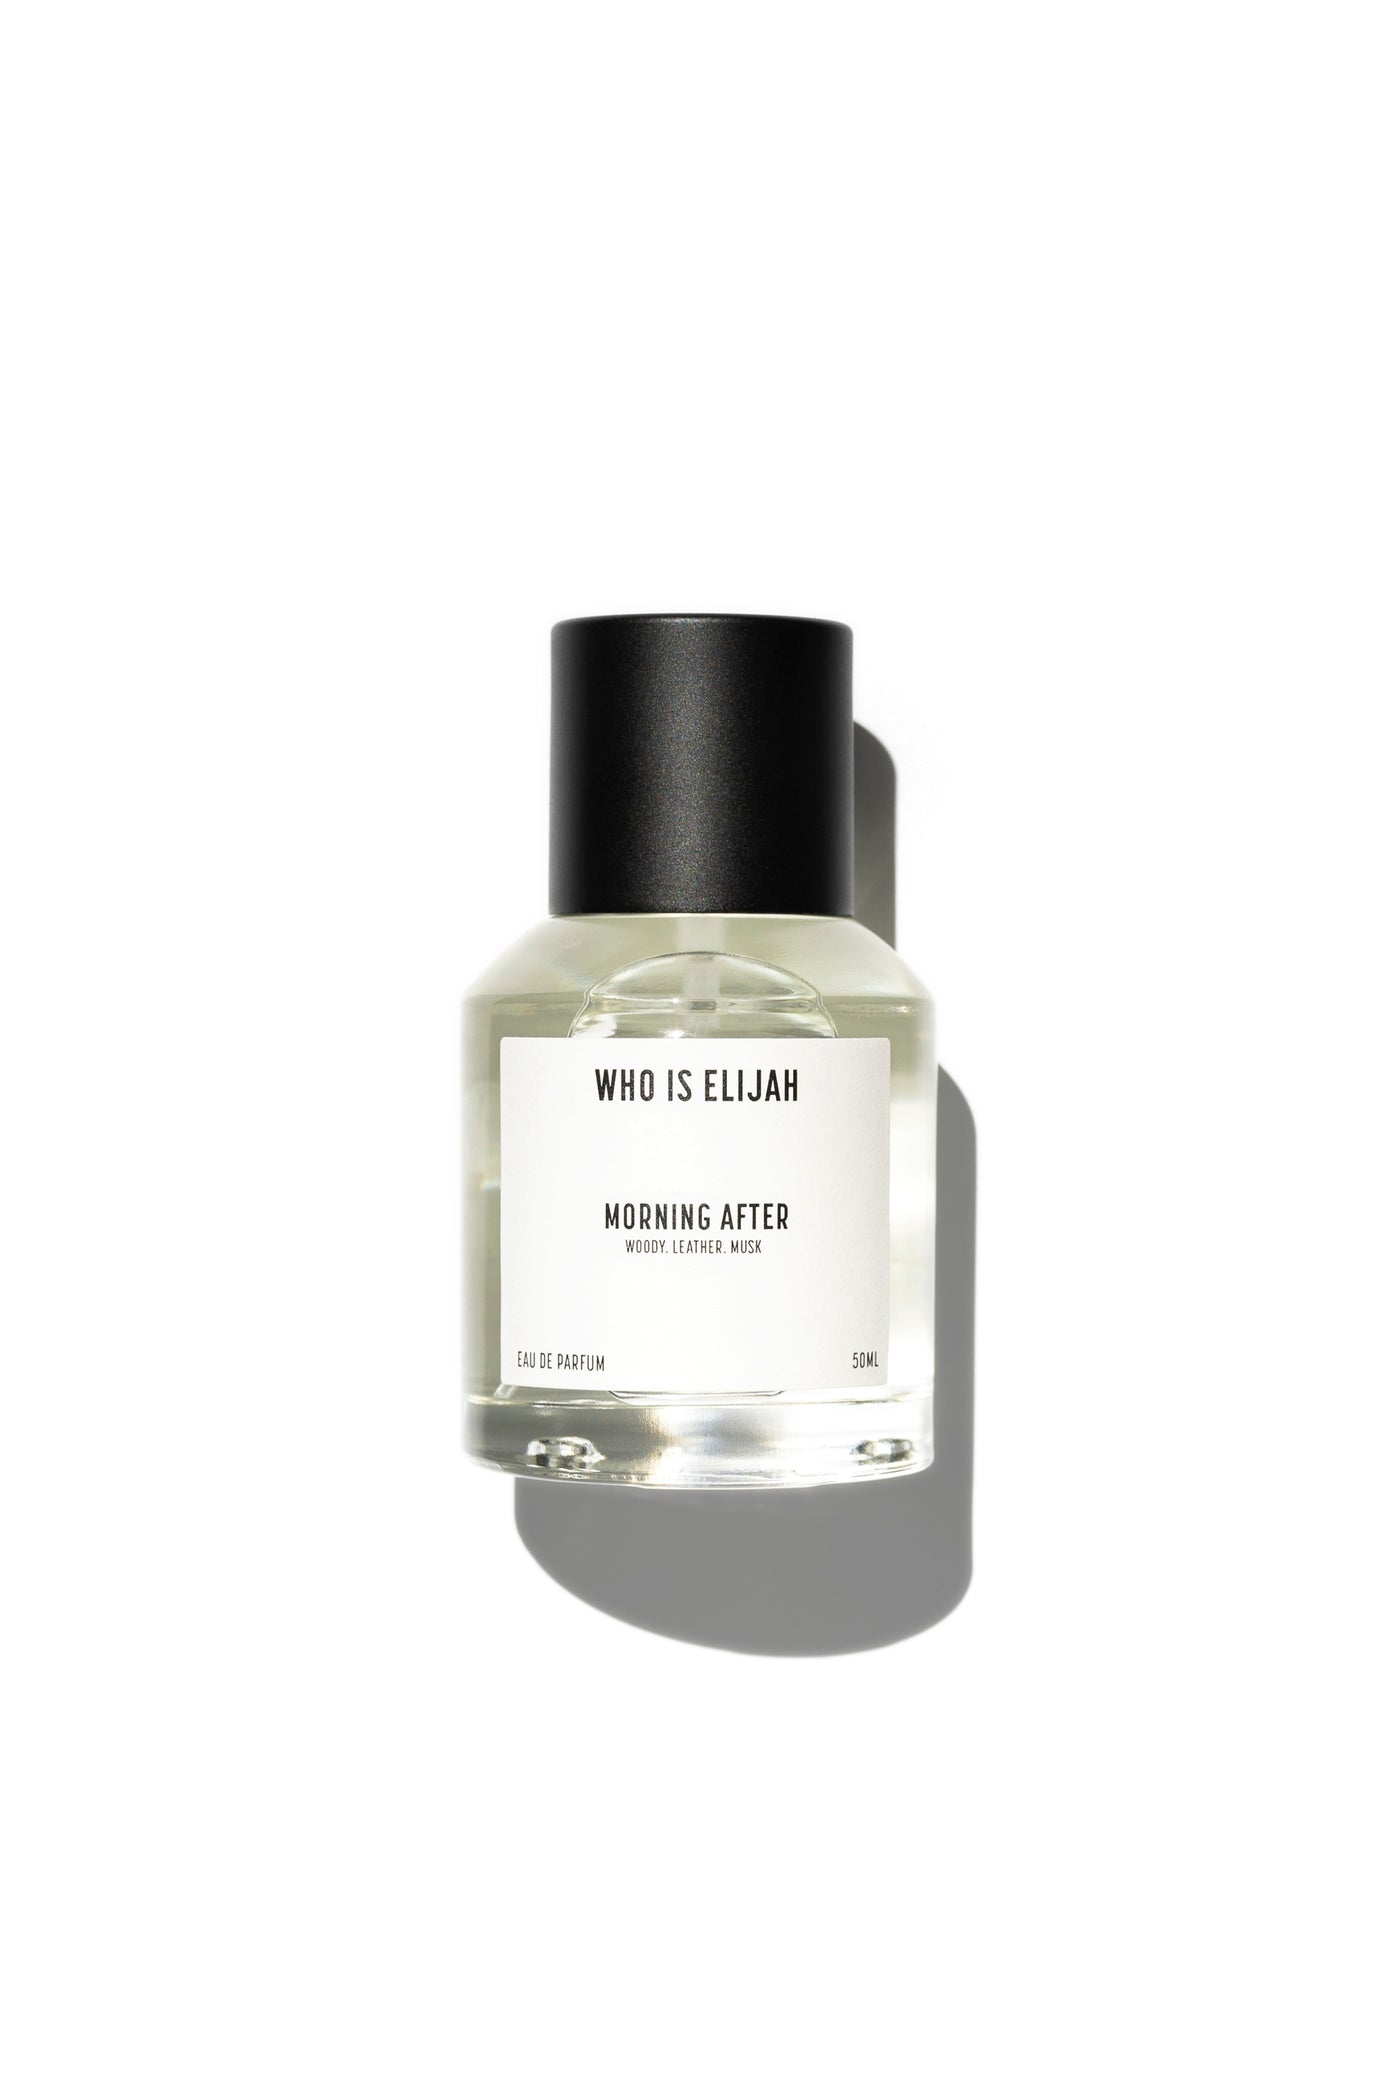 Who Is Elijah Perfume 50ml - Morning After